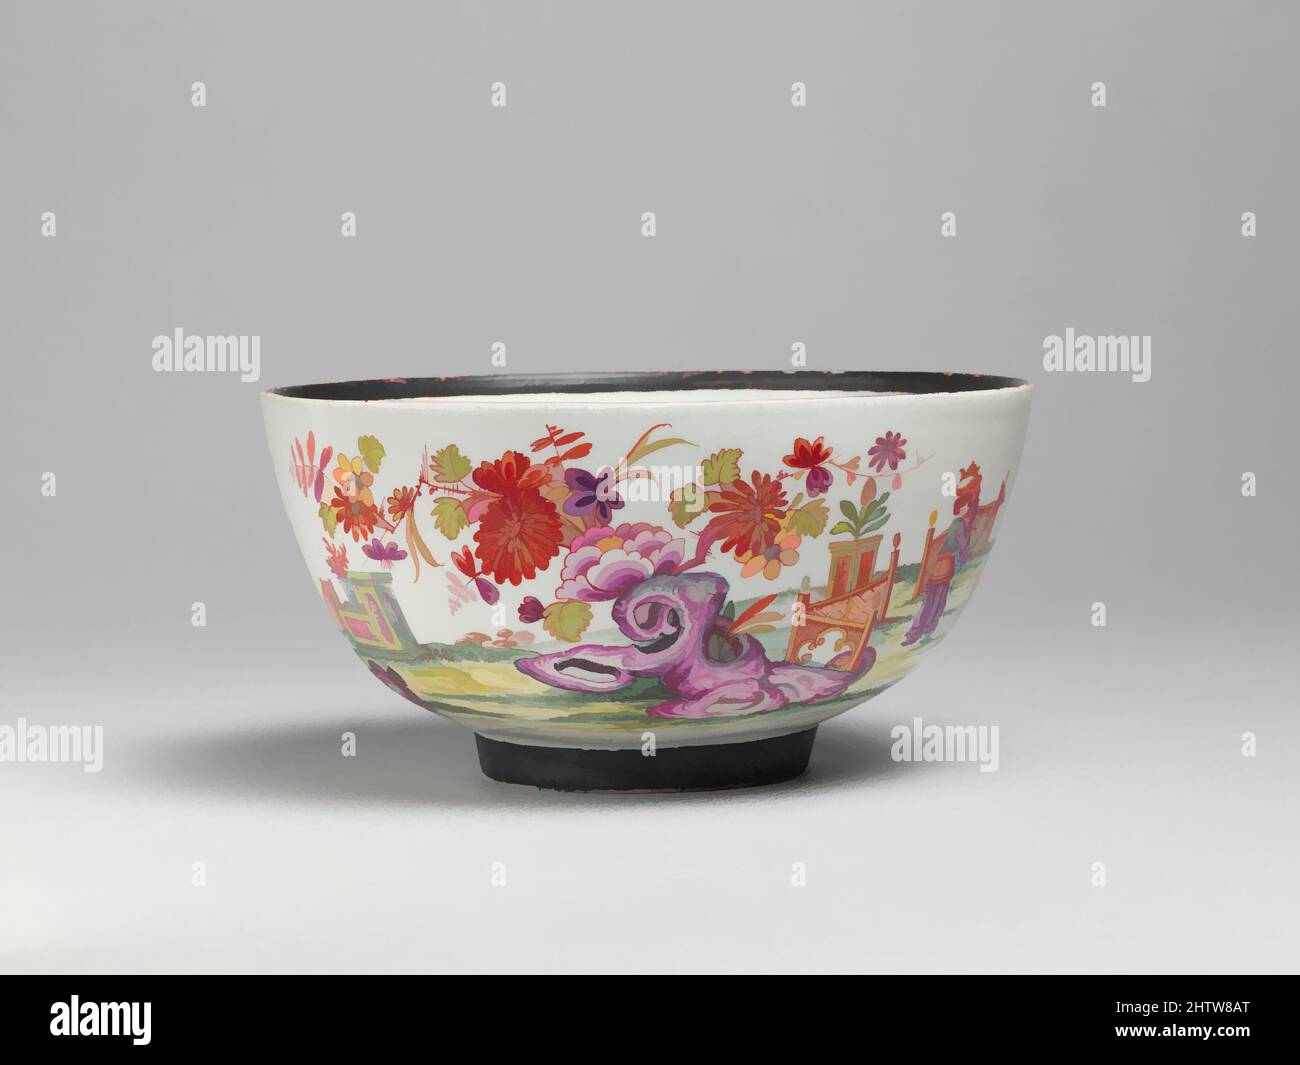 Art inspired by Bowl, ca. 1730–35, Austrian, Vienna, Hard-paste porcelain, Height: 3 7/16 in. (8.7 cm), Ceramics-Porcelain, Classic works modernized by Artotop with a splash of modernity. Shapes, color and value, eye-catching visual impact on art. Emotions through freedom of artworks in a contemporary way. A timeless message pursuing a wildly creative new direction. Artists turning to the digital medium and creating the Artotop NFT Stock Photo